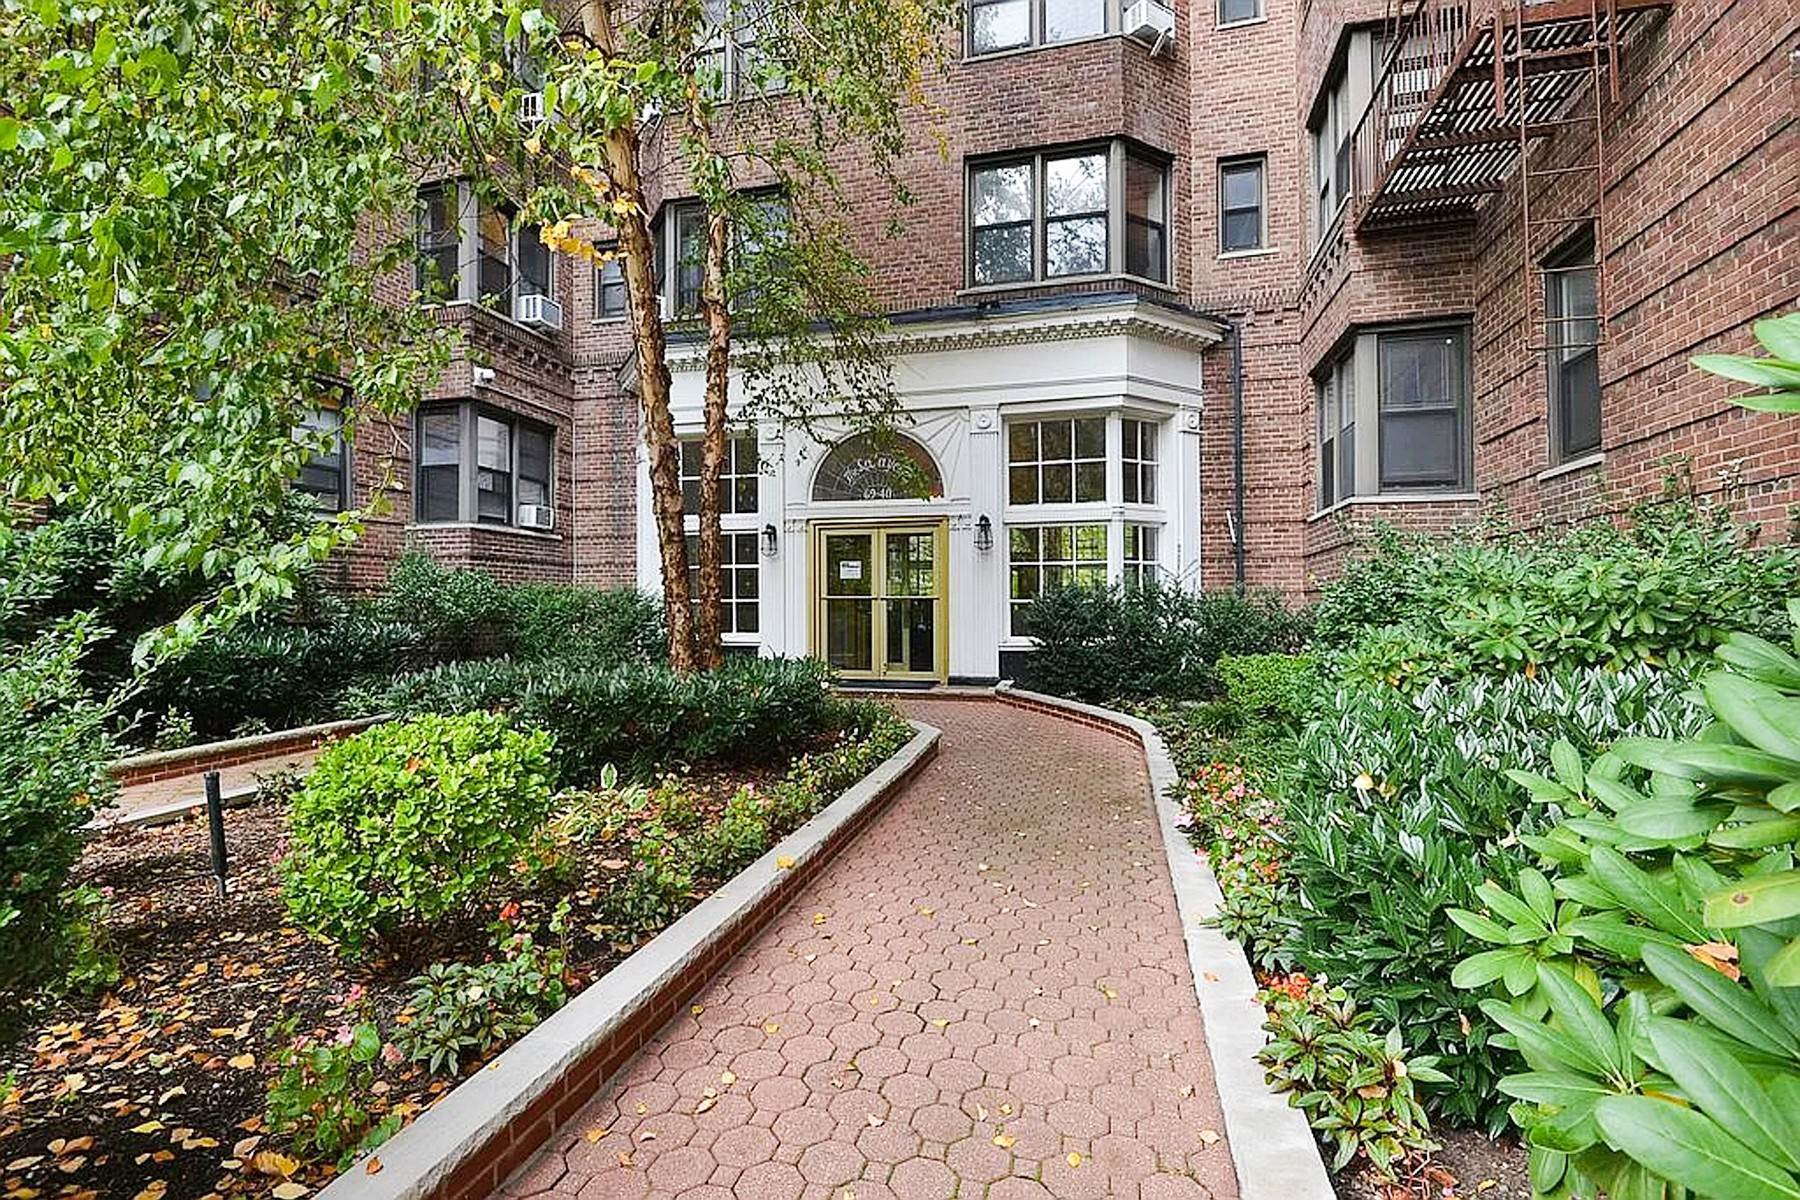 Co-op Properties for Sale at 'TWO BEDROOM GEM IN PRIME FOREST HILLS LOCATION' 69-40 Yellowstone Boulevard, #417 Forest Hills, New York 11375 United States